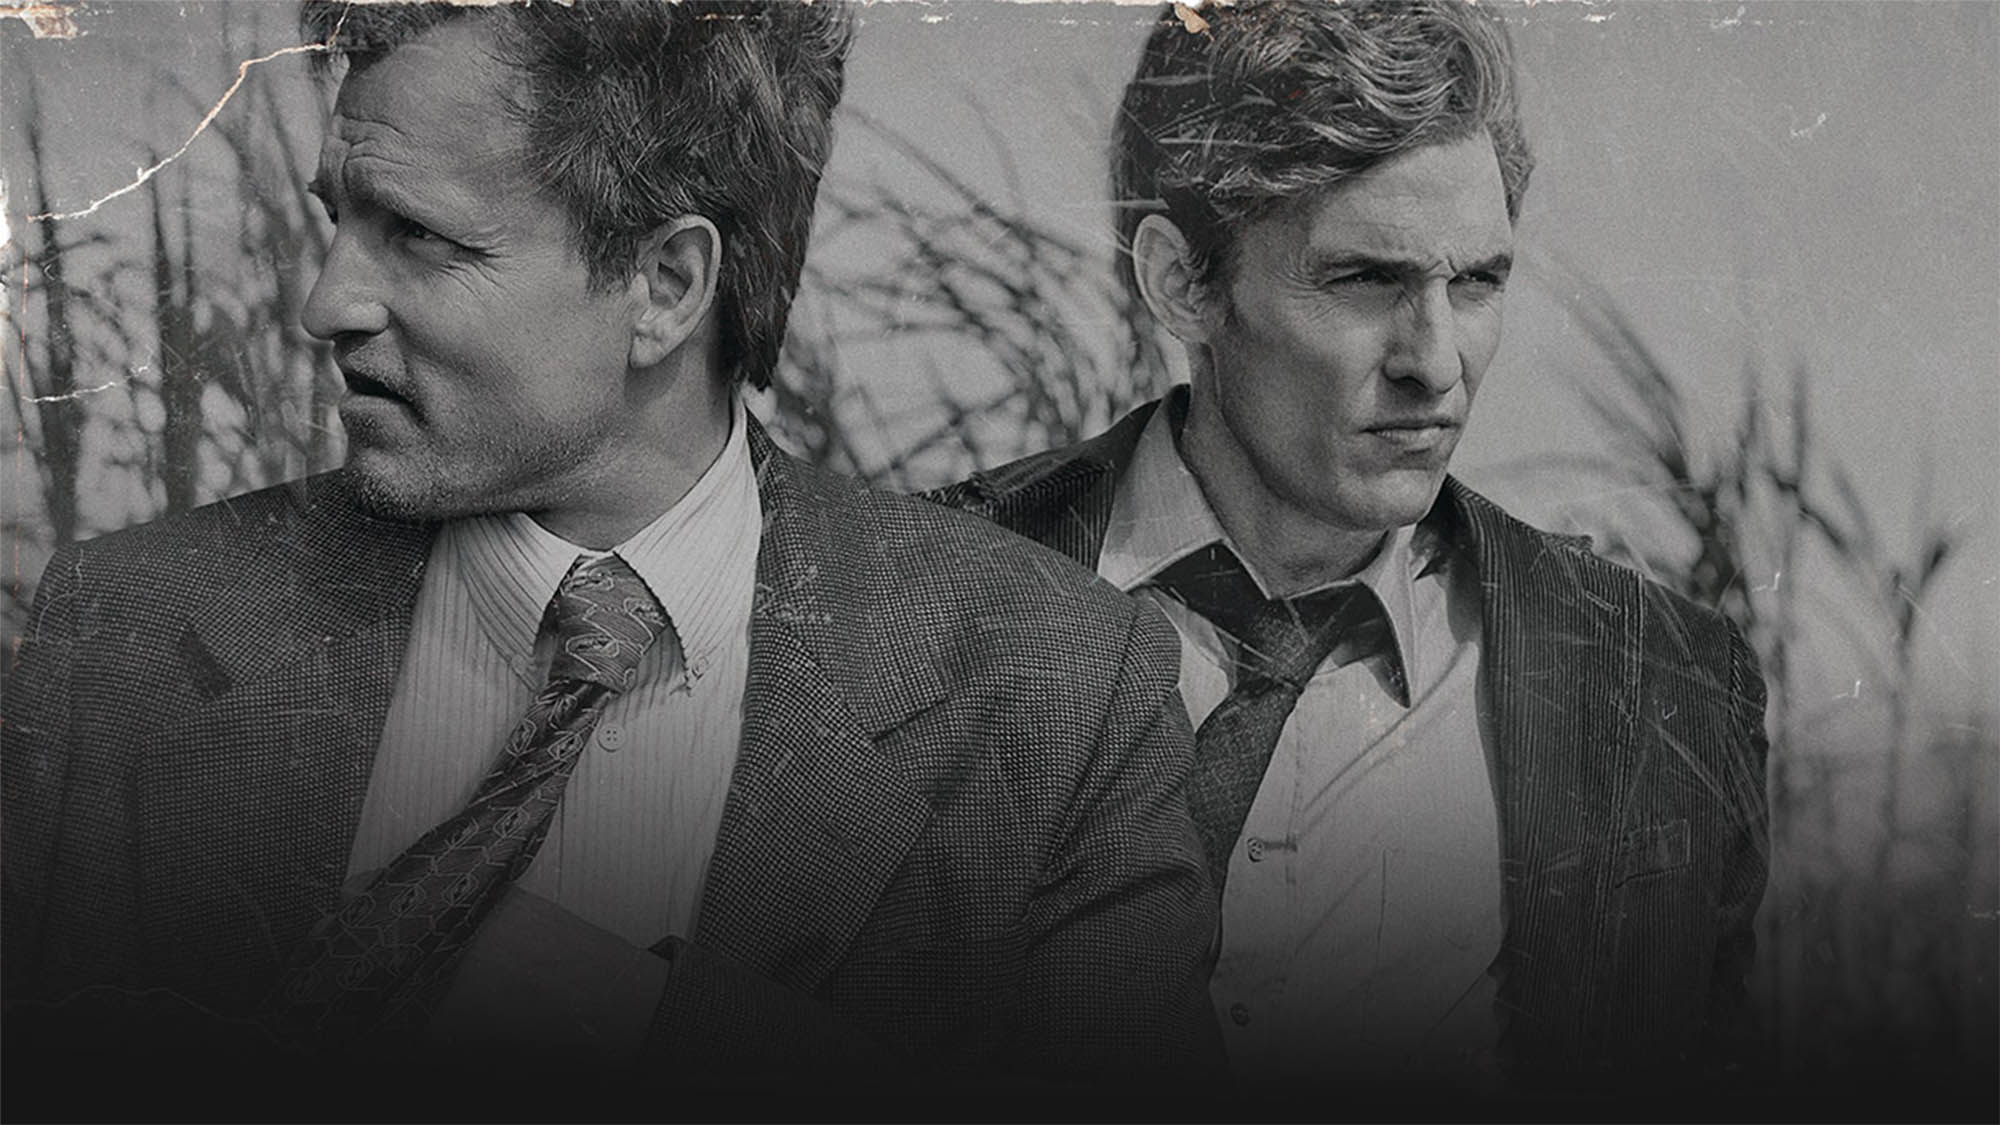 When season one of HBO’s 'True Detective' hit our screens back in 2014, our lives changed. To keep yourself up to date, here’s everything the green-eared spaghetti monster has revealed about S3 of 'True Detective' so far.